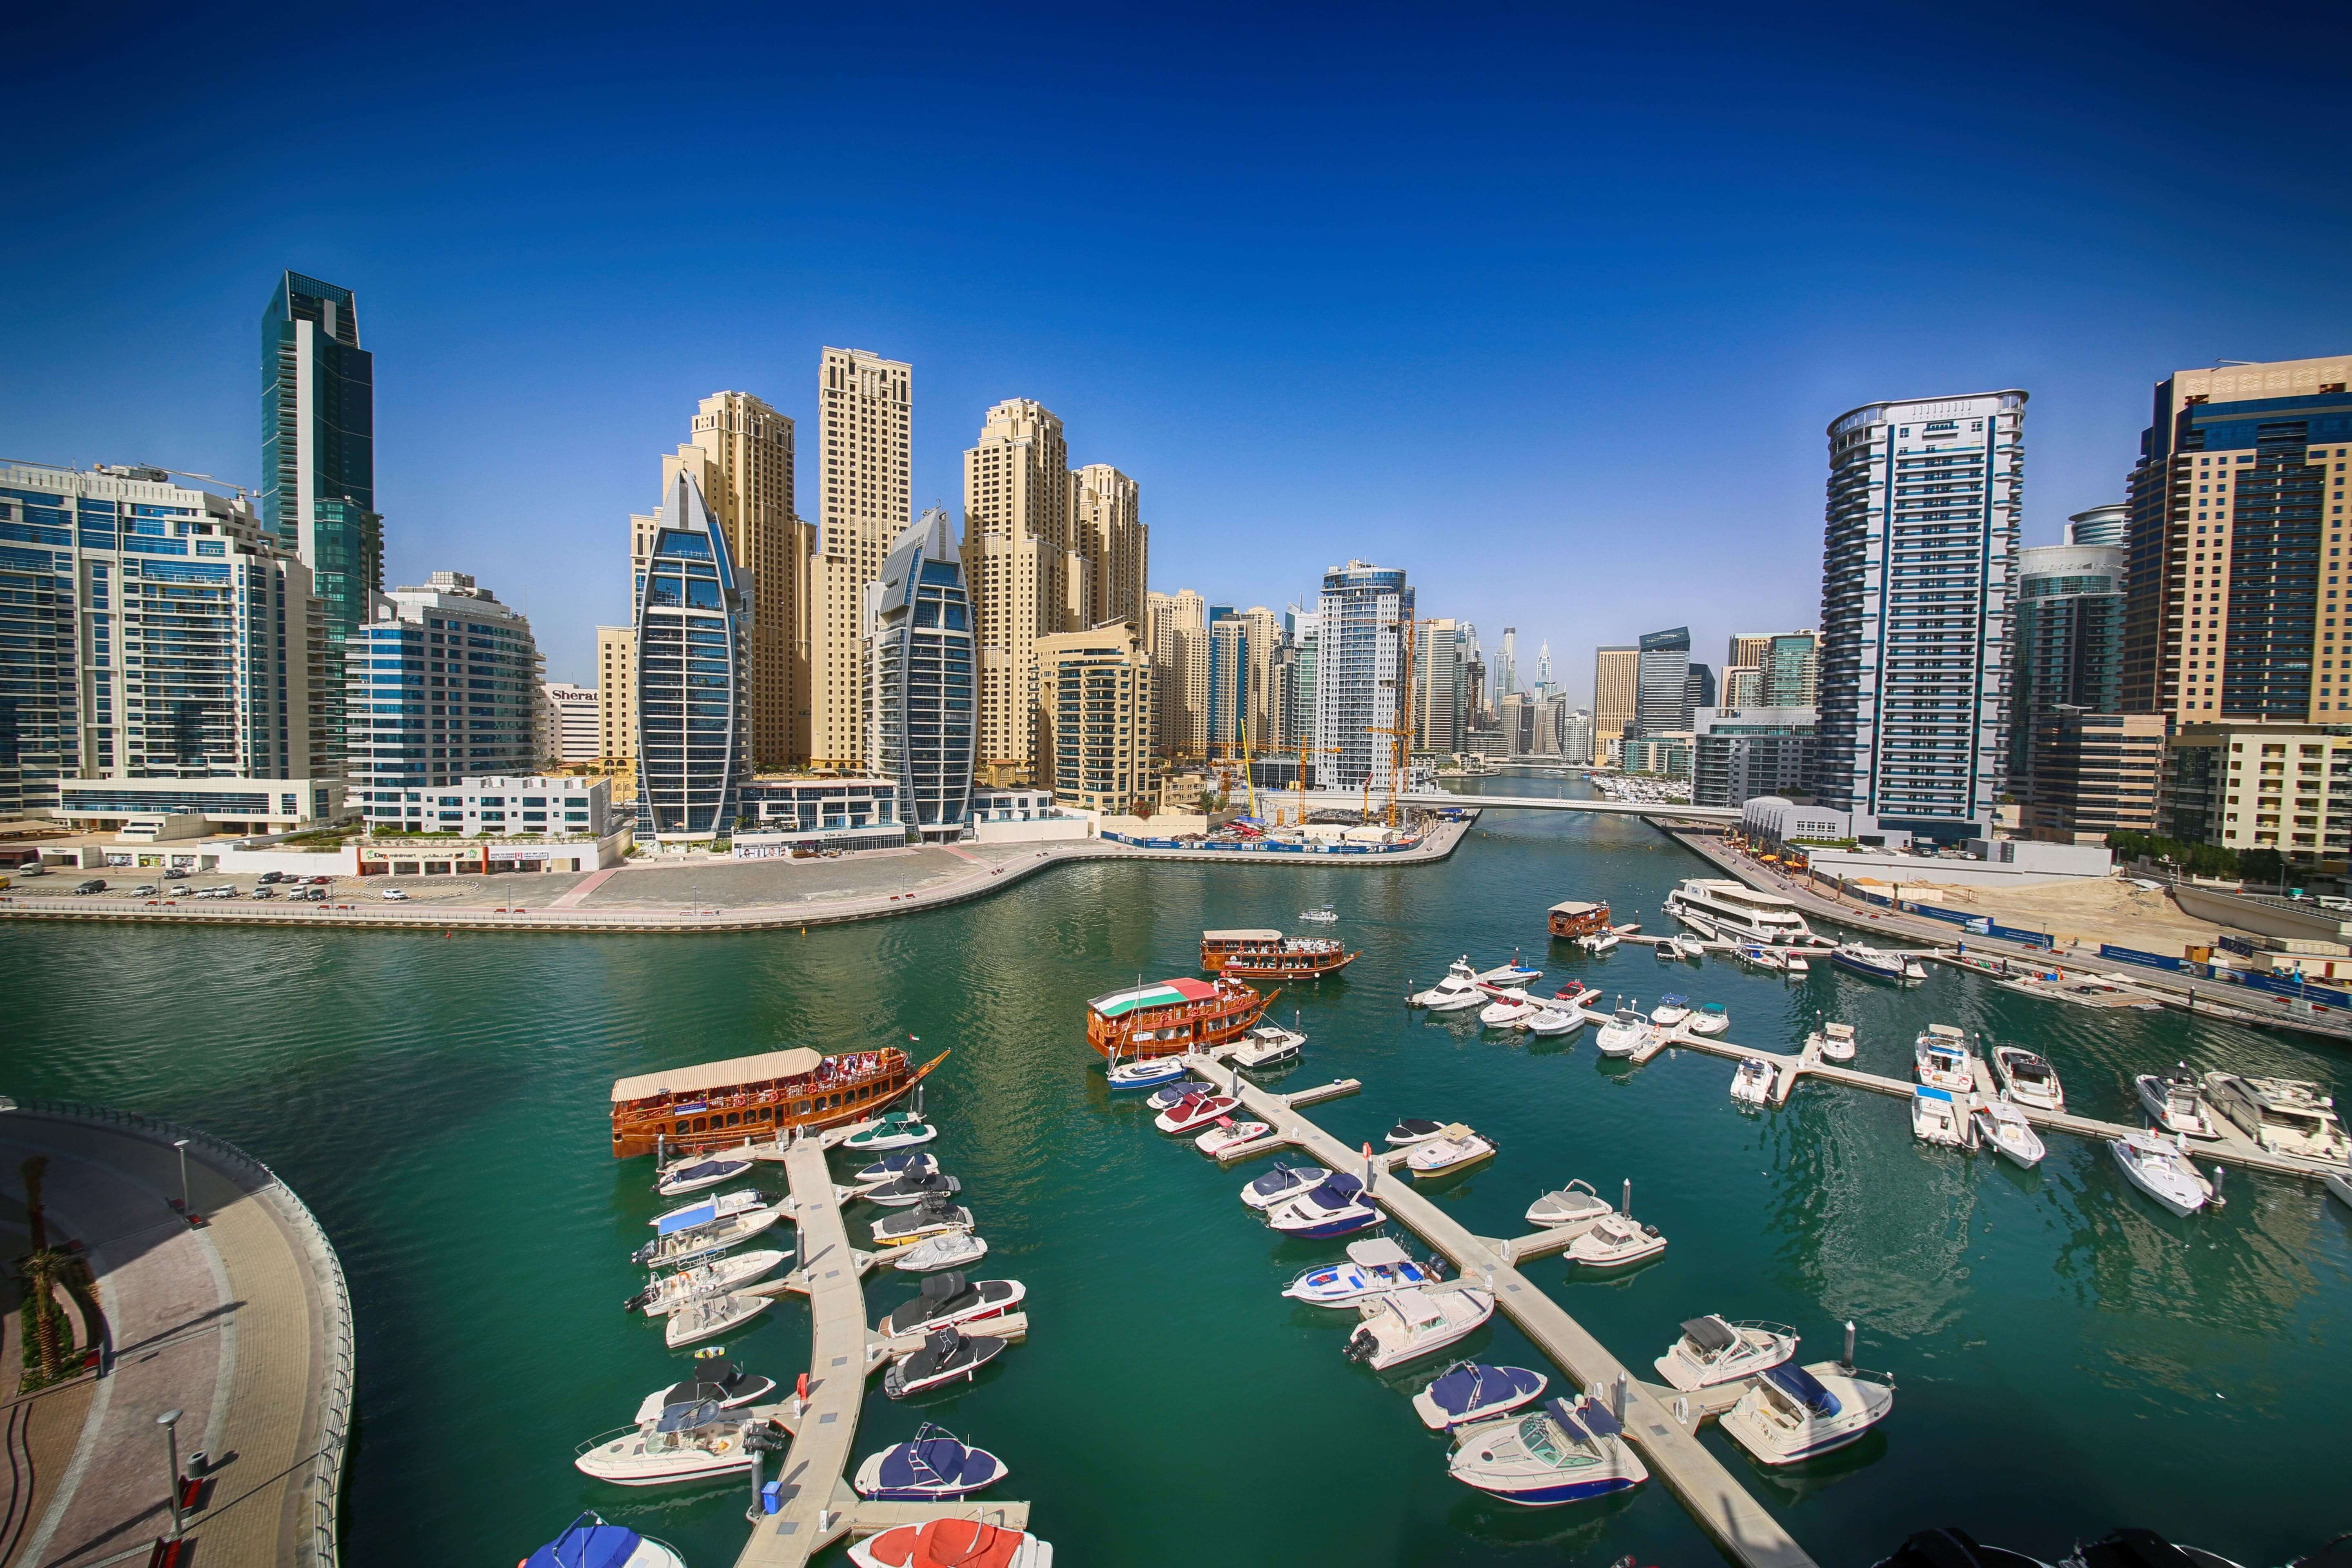 Photography Tour- Explore Picturesque Landscapes Of Old And Modern Dubai